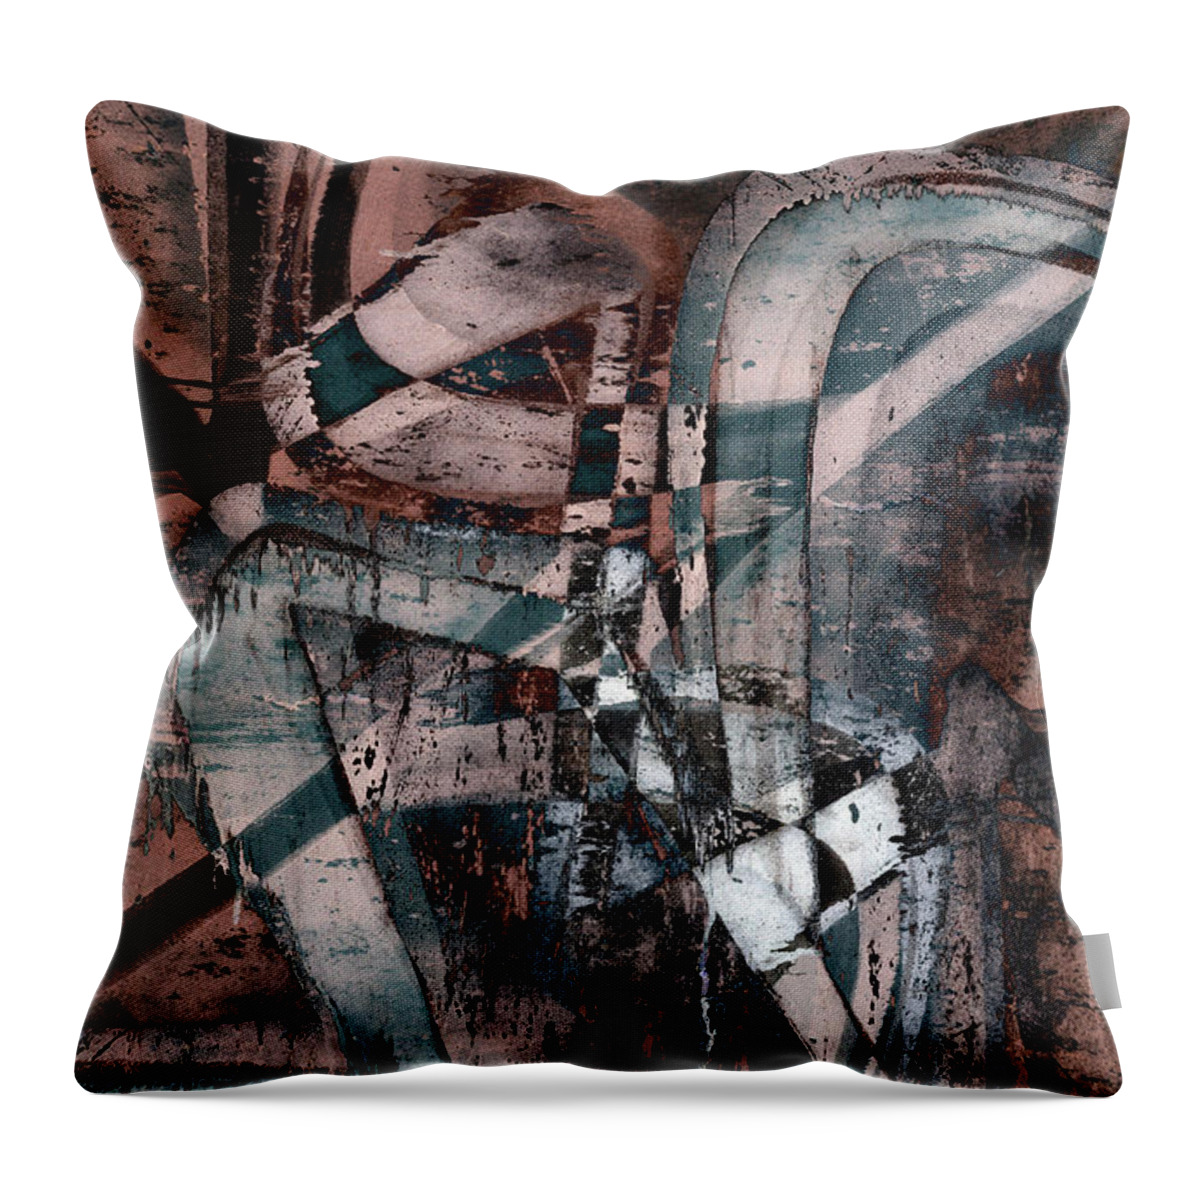 Abstract Throw Pillow featuring the digital art Abstract graffiti 1 by Steve Ball